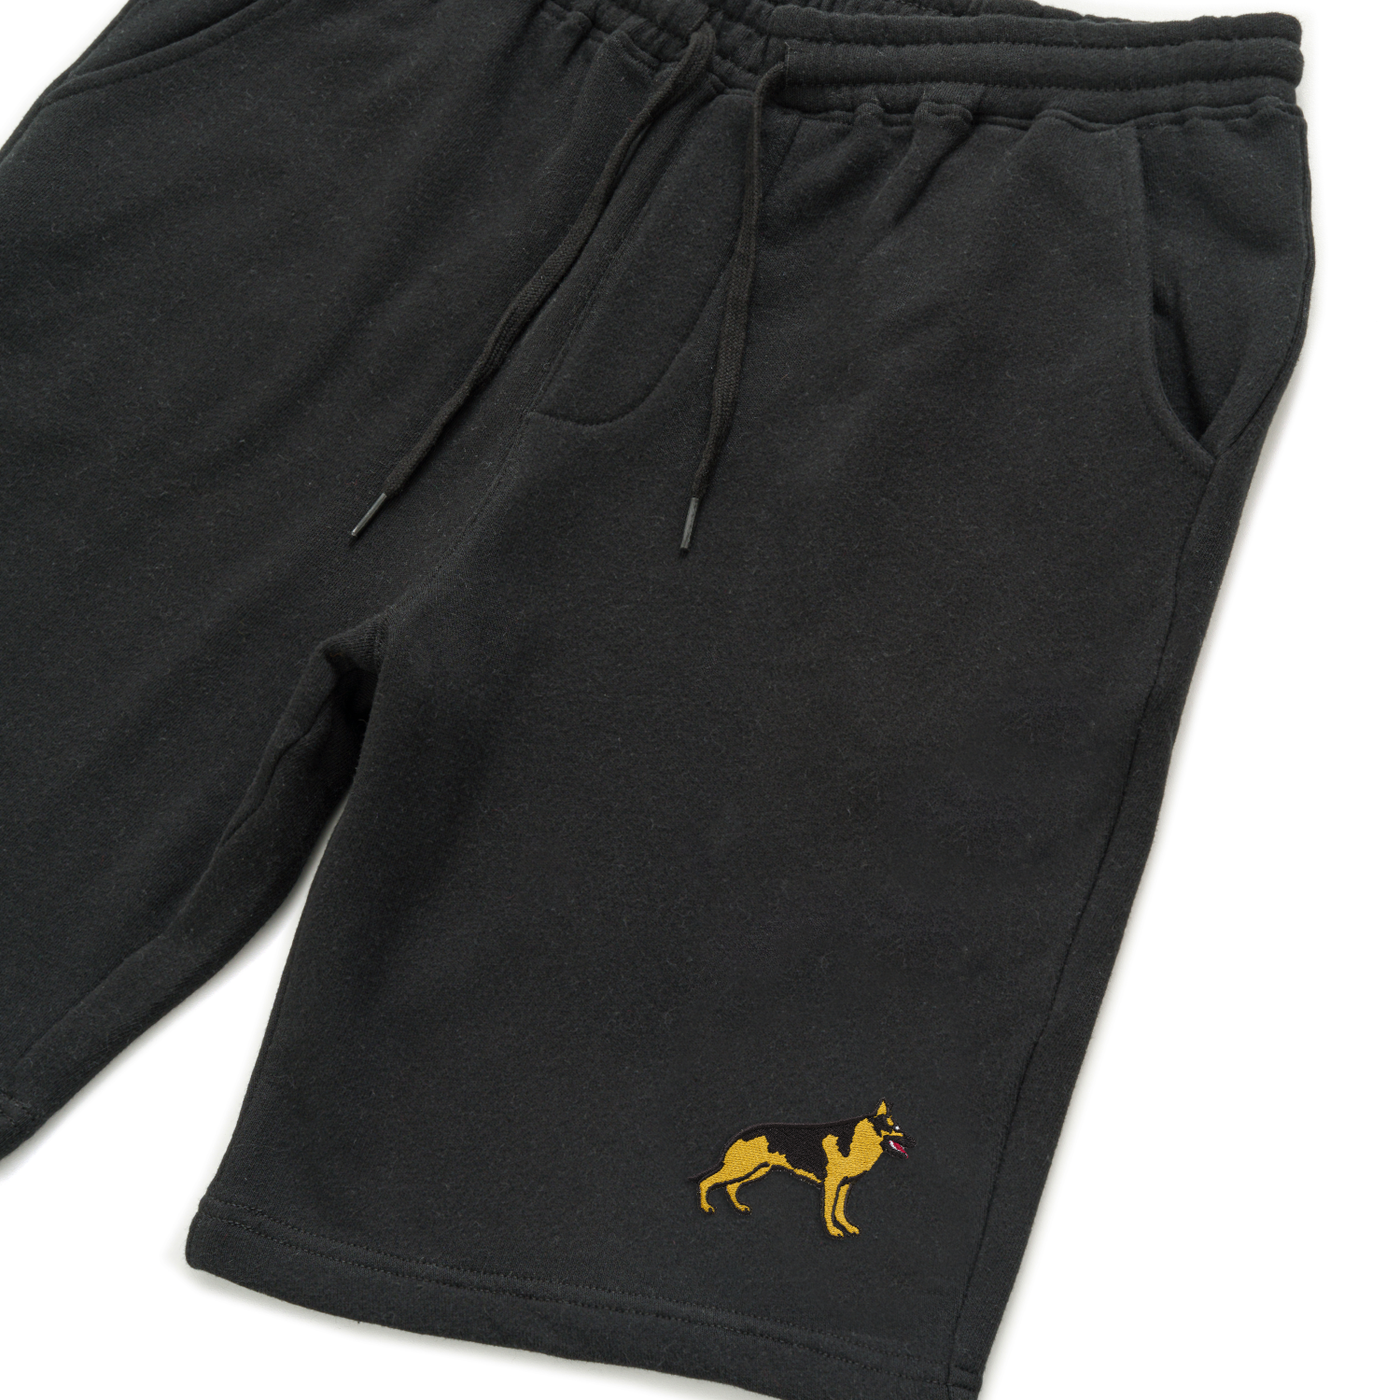 Bobby's Planet Men's Embroidered German Shepherd Shorts from Paws Dog Cat Animals Collection in Black Color#color_black